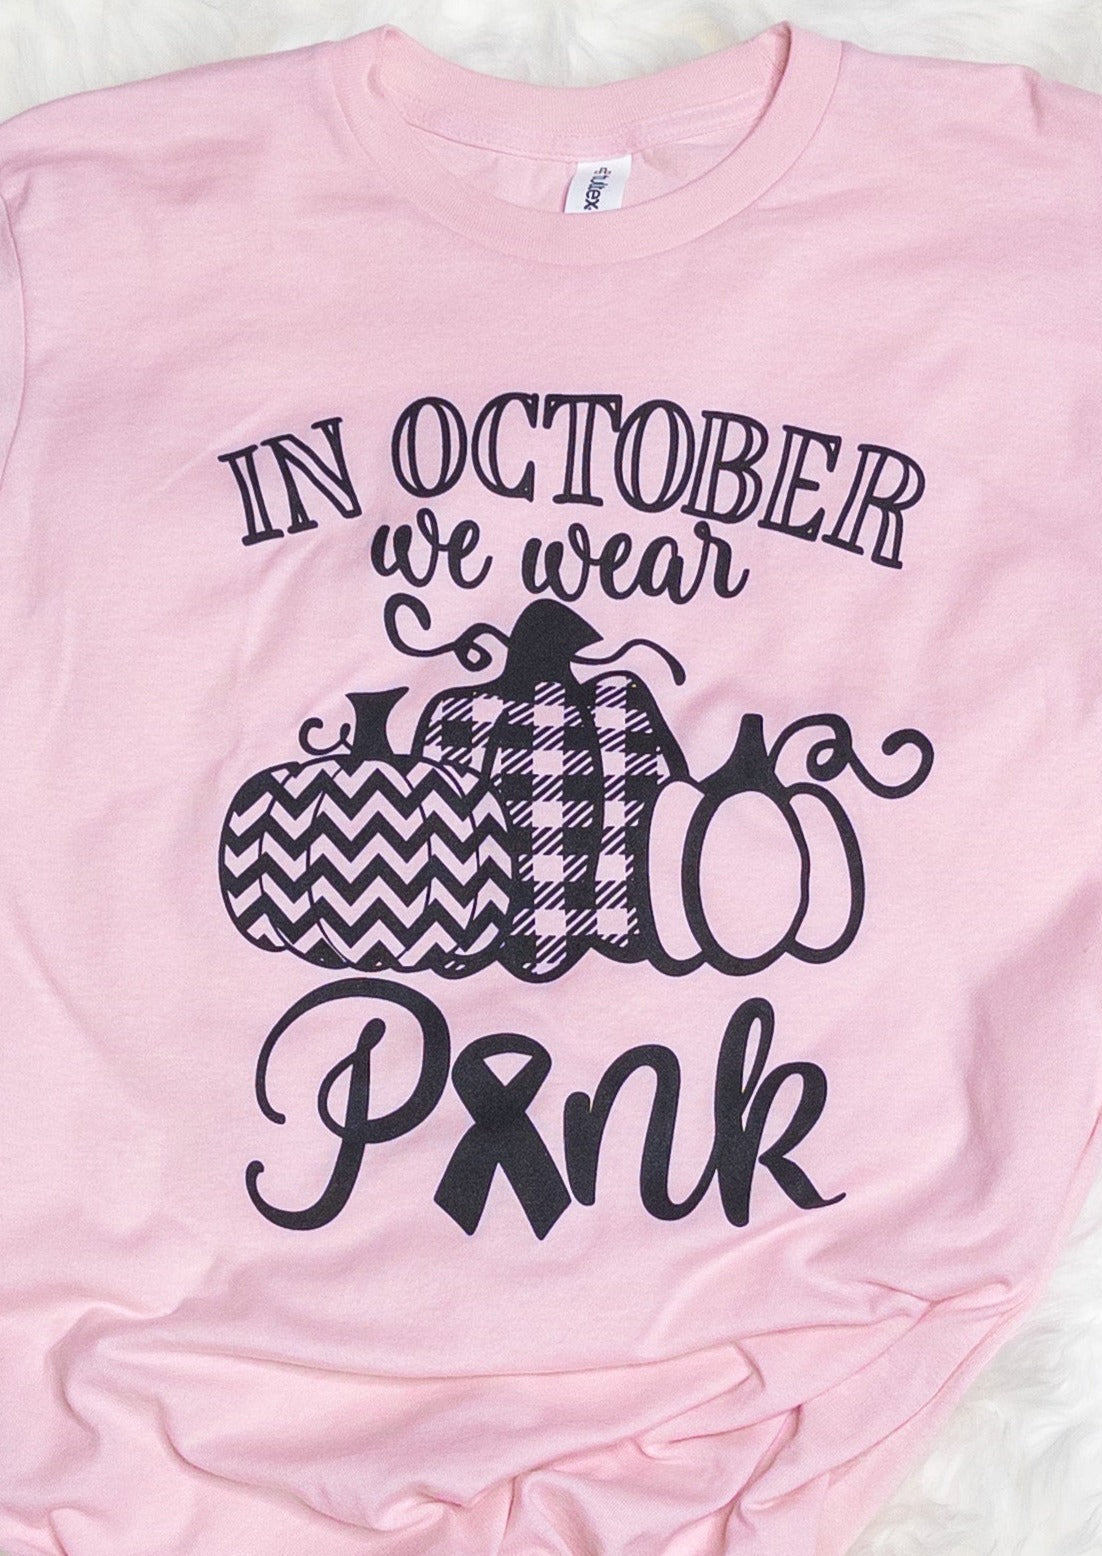 A light pink colored tee shirt that says "In October we wear pink". It has three pumpkins, each with a different pattern.